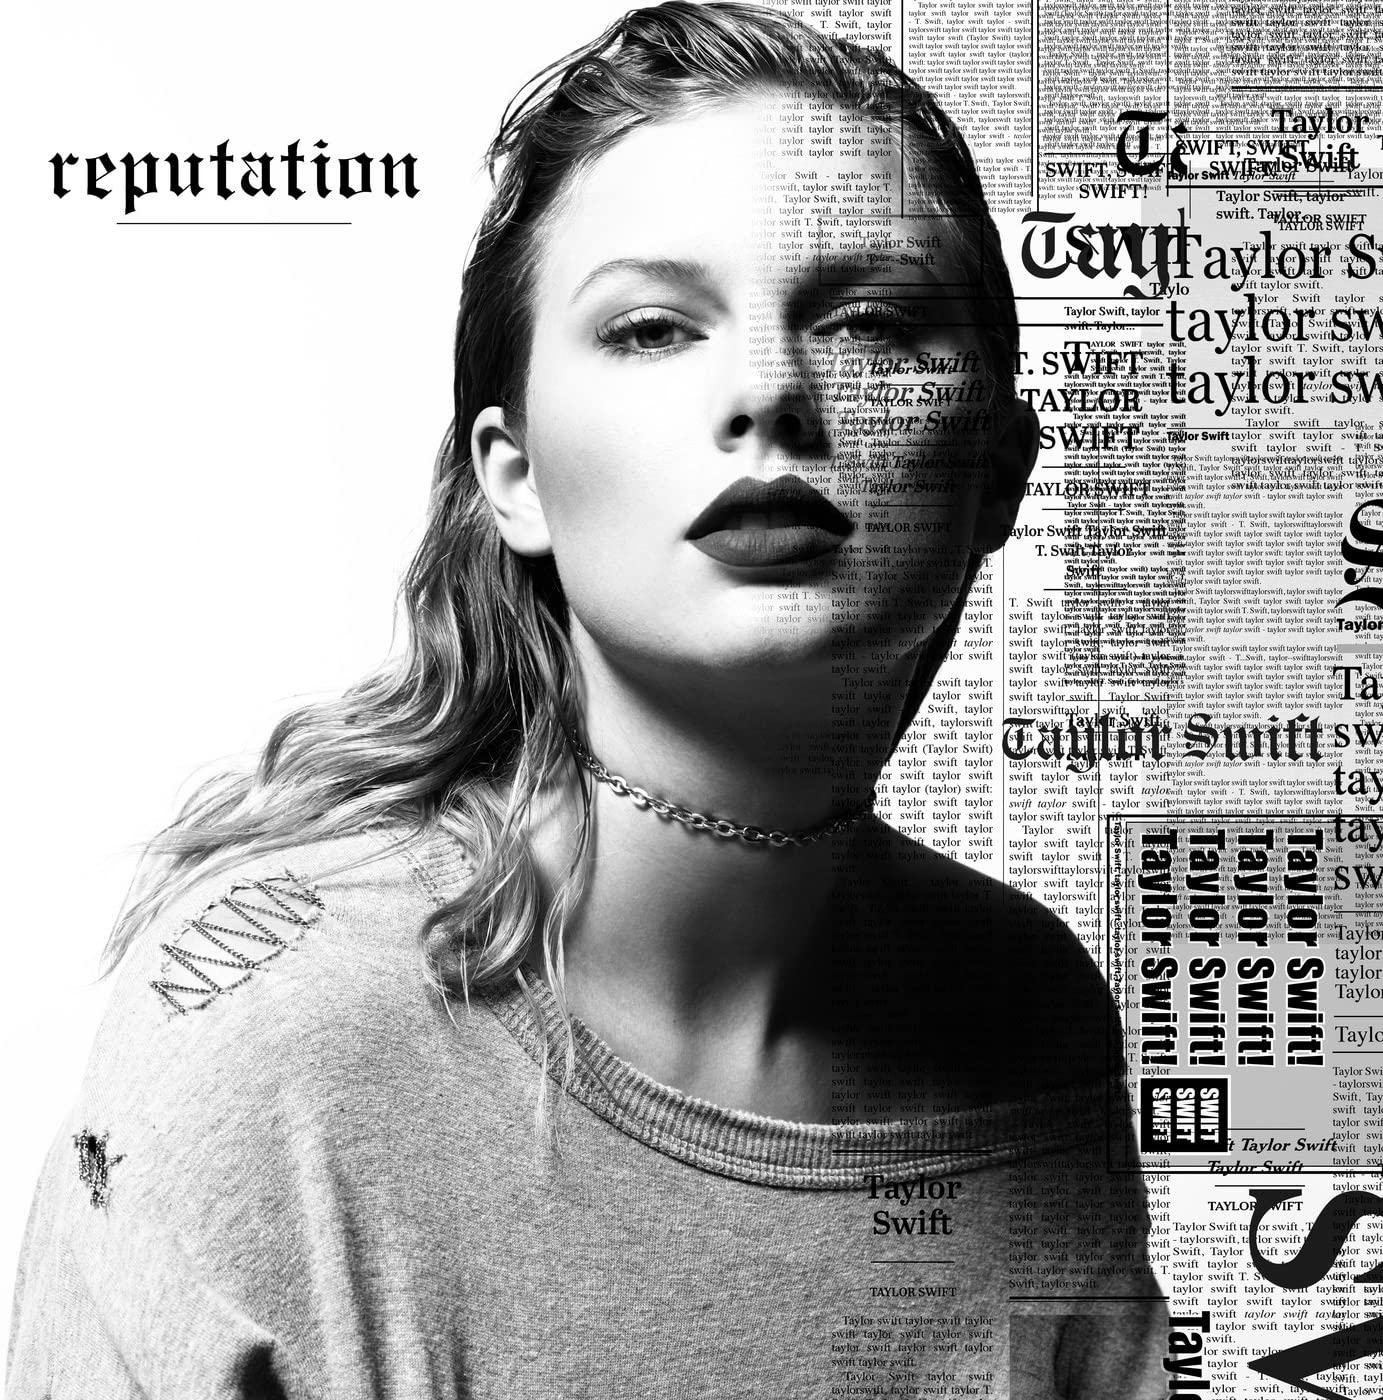 Taylor Swift reputation Vinyl For Sale in OMG Zhivago Galway